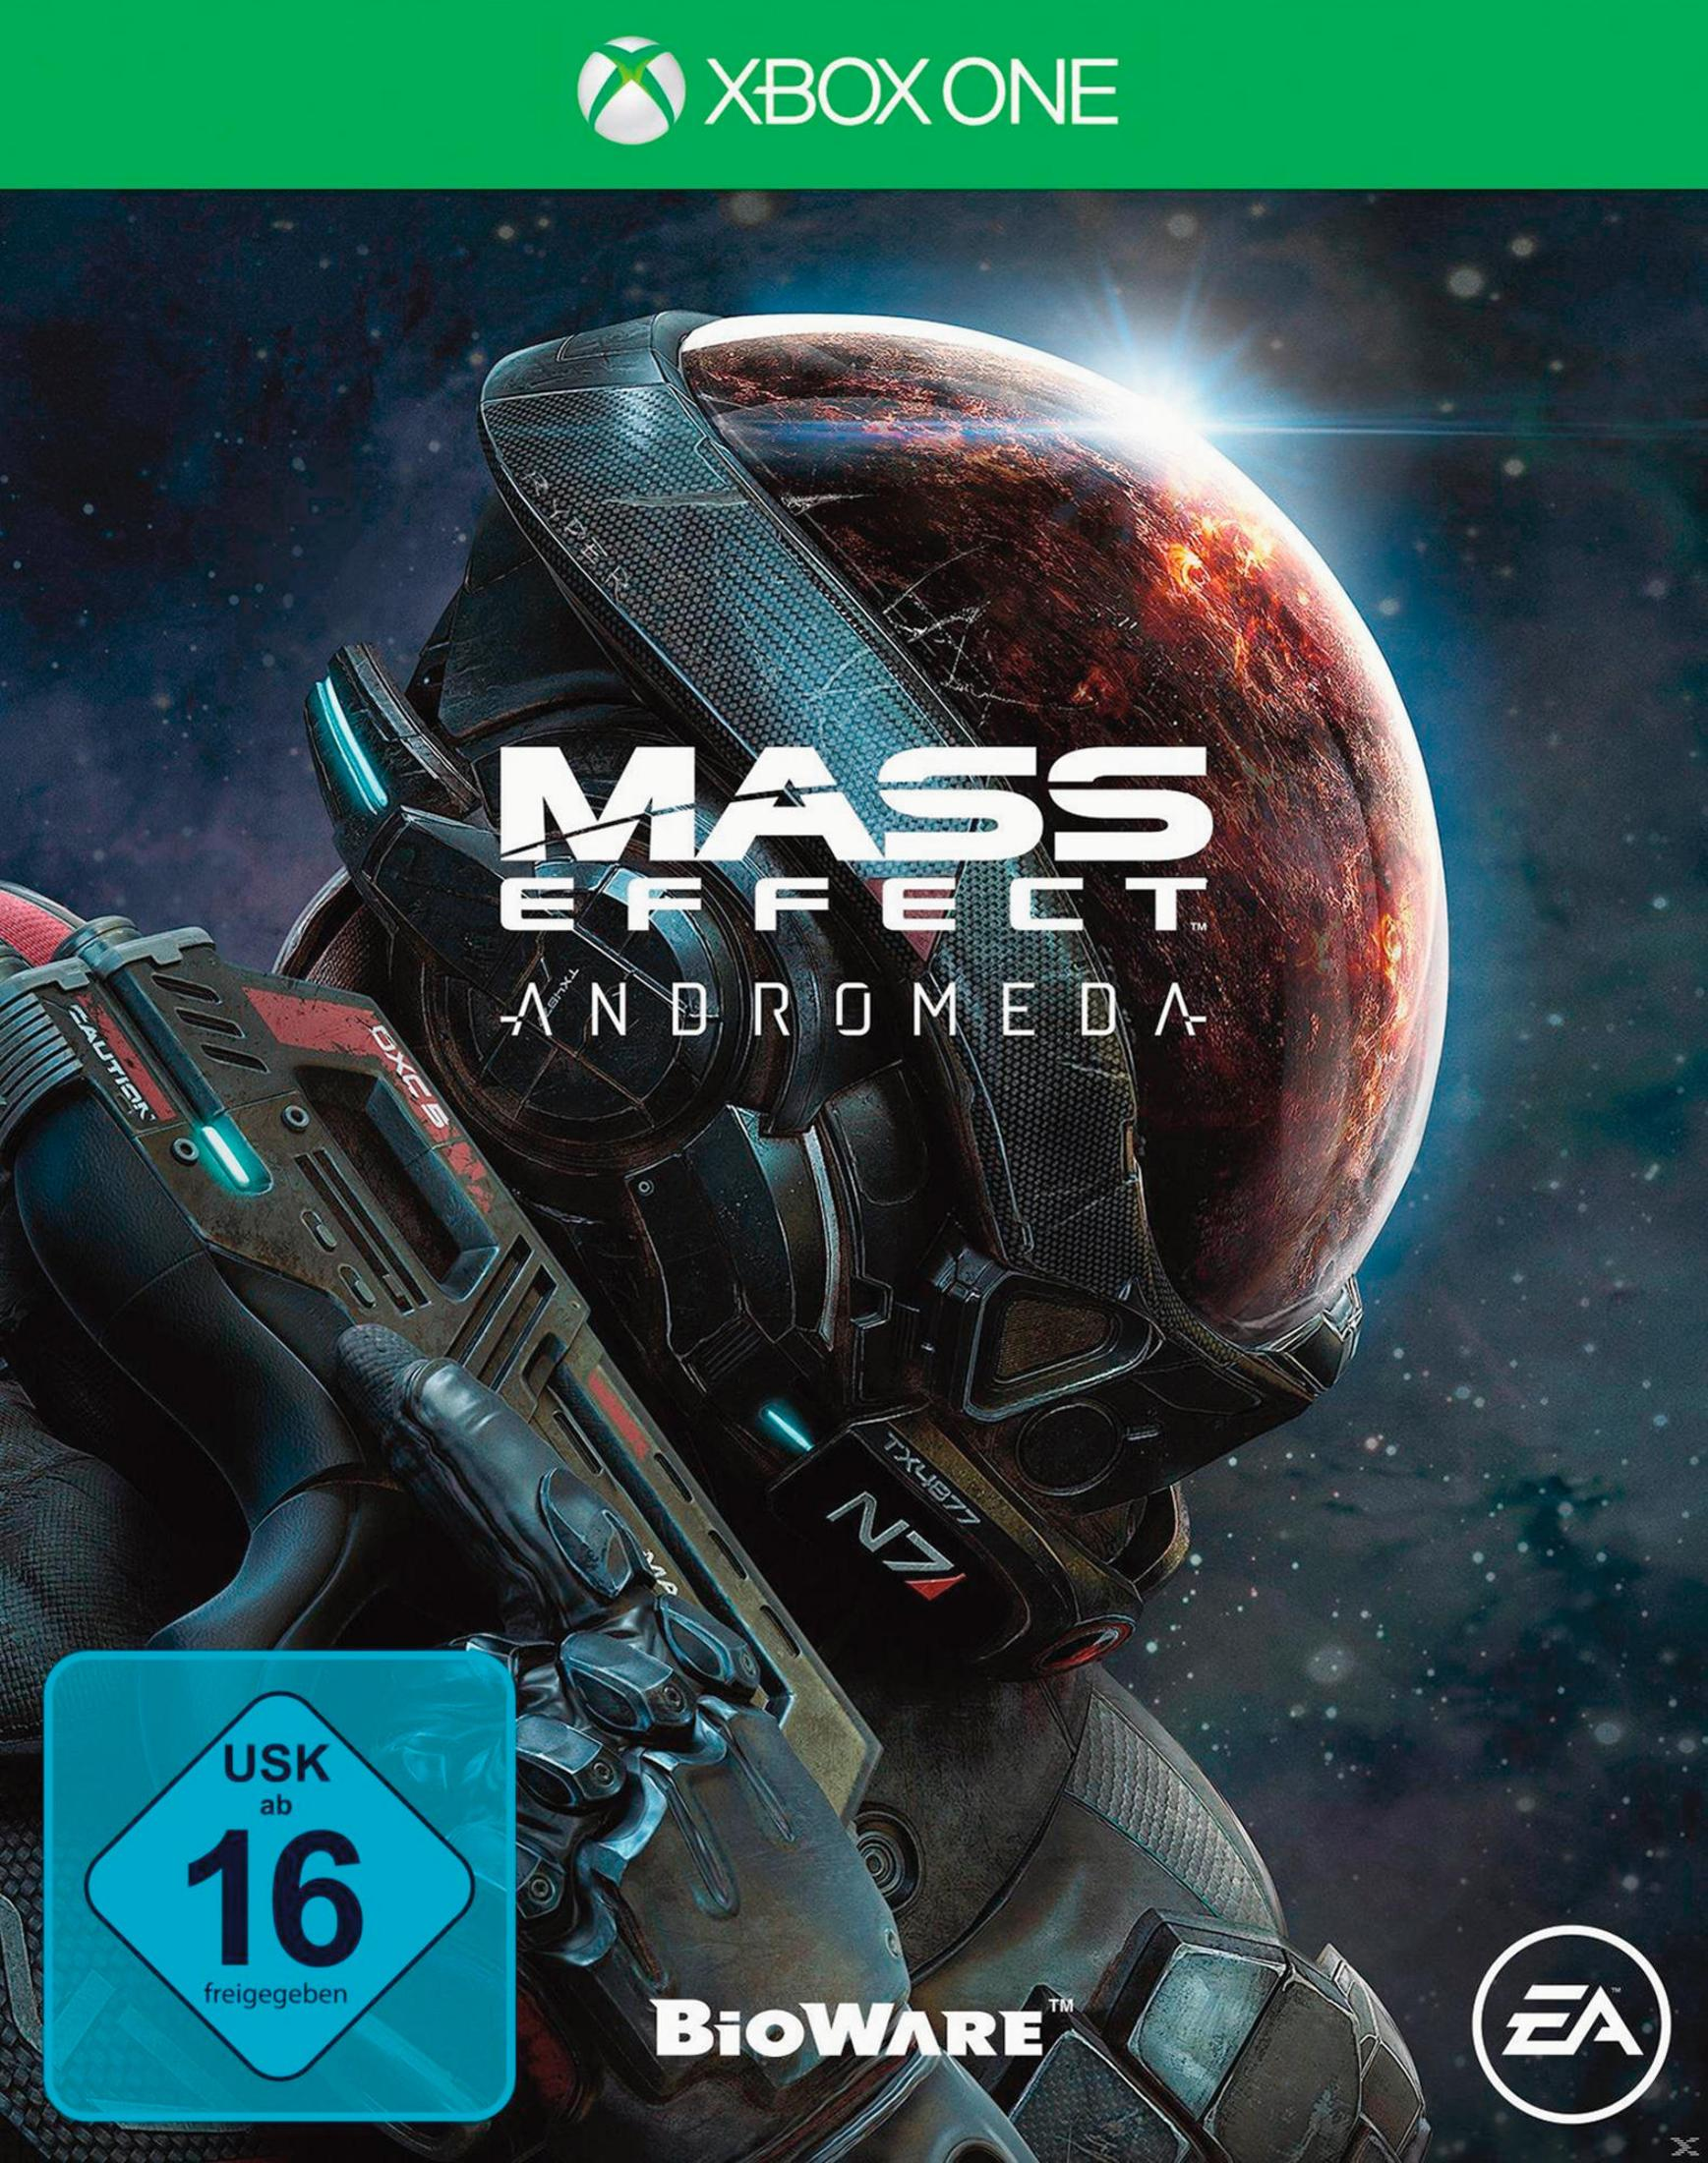 Mass Effect Andromeda - One] [Xbox